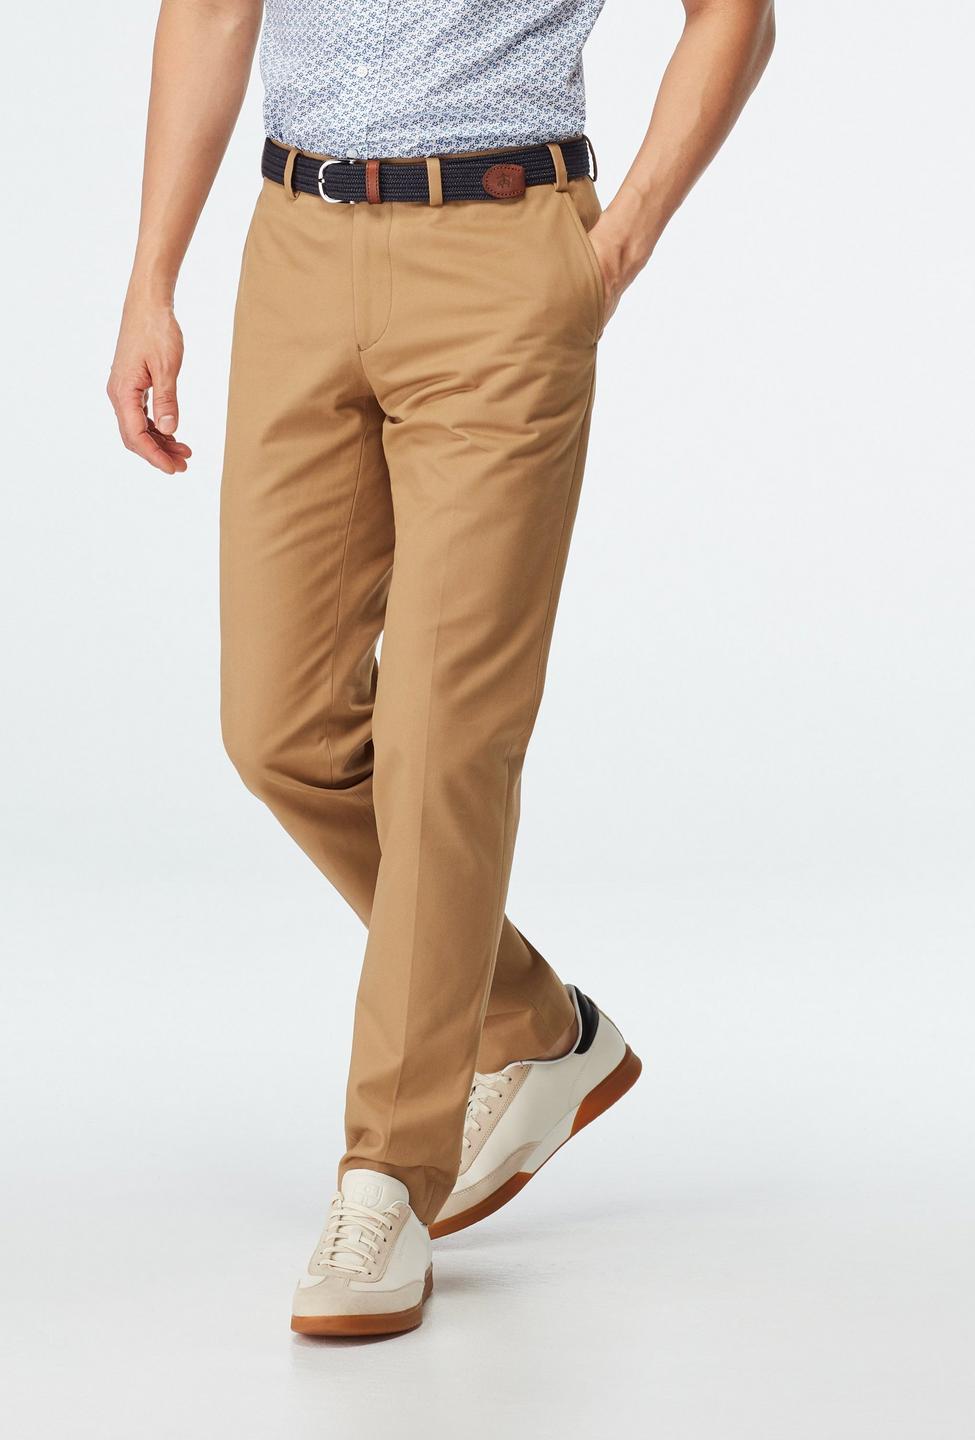 Brown pants - Halton Solid Design from Premium Indochino Collection